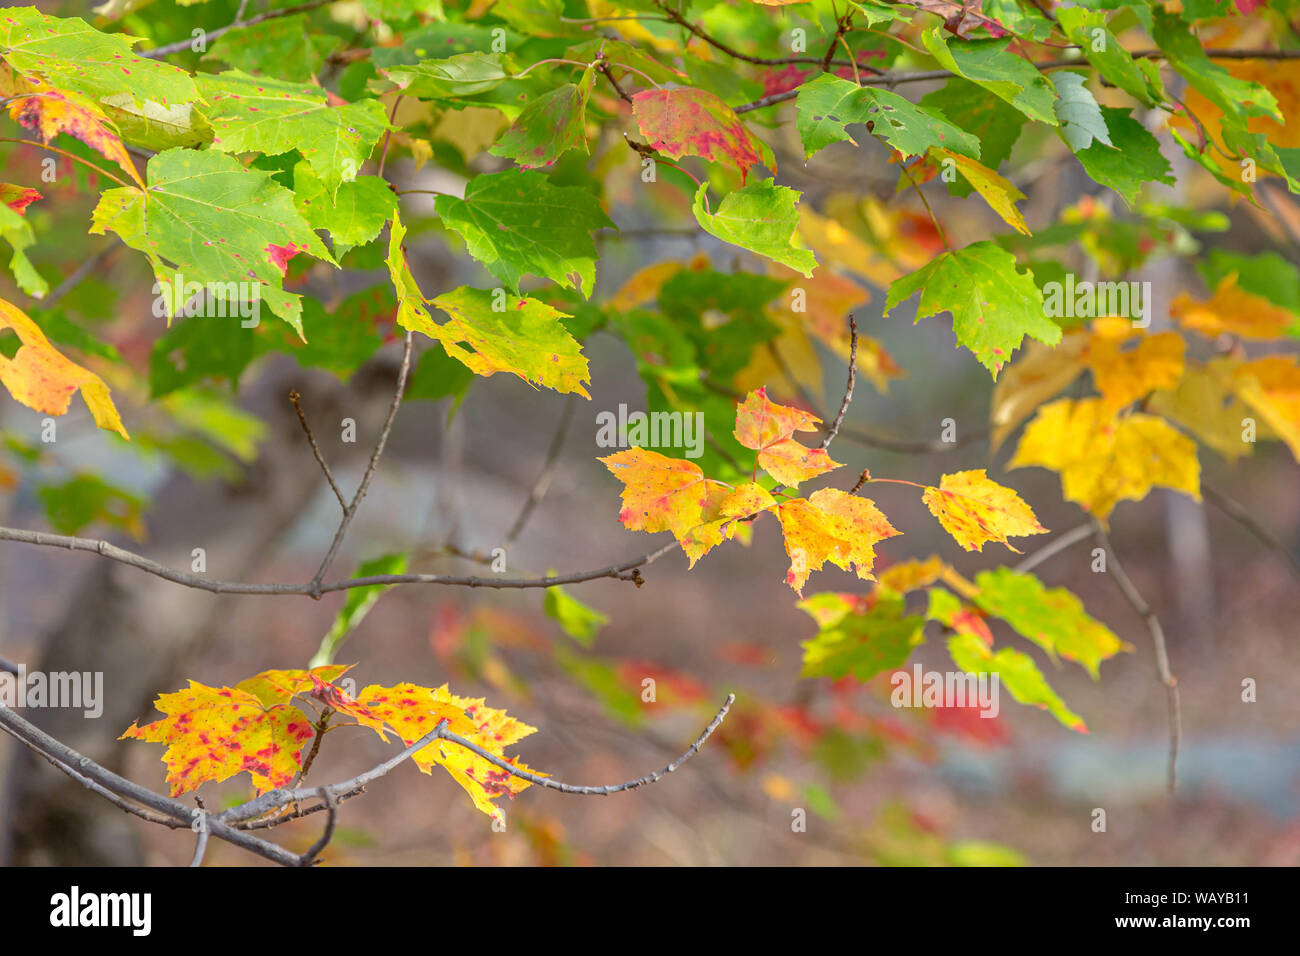 Maple leaves  in a tree branch with October autumn colors Stock Photo